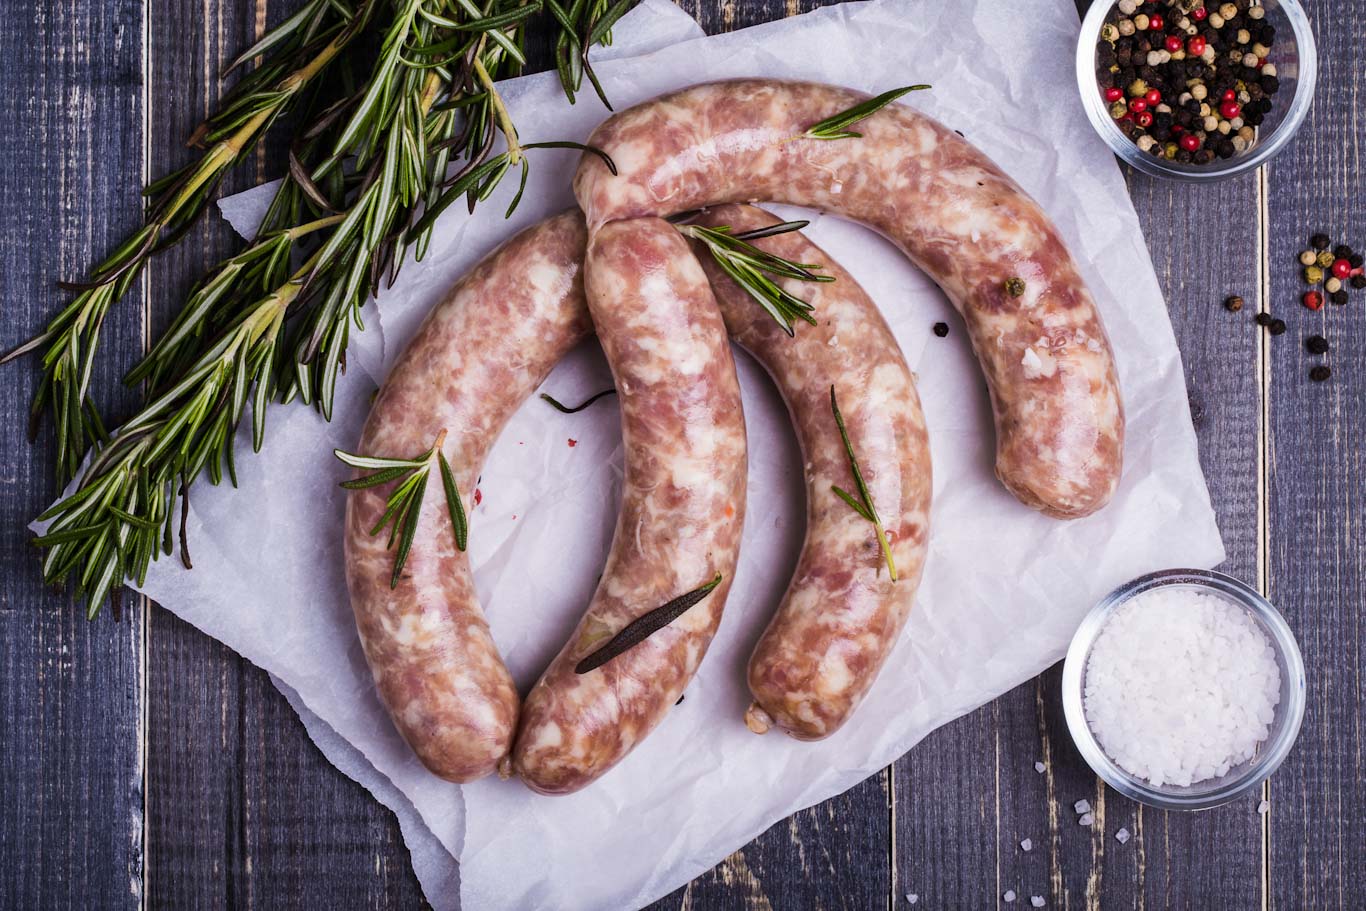 Why is fat so important for sausages?